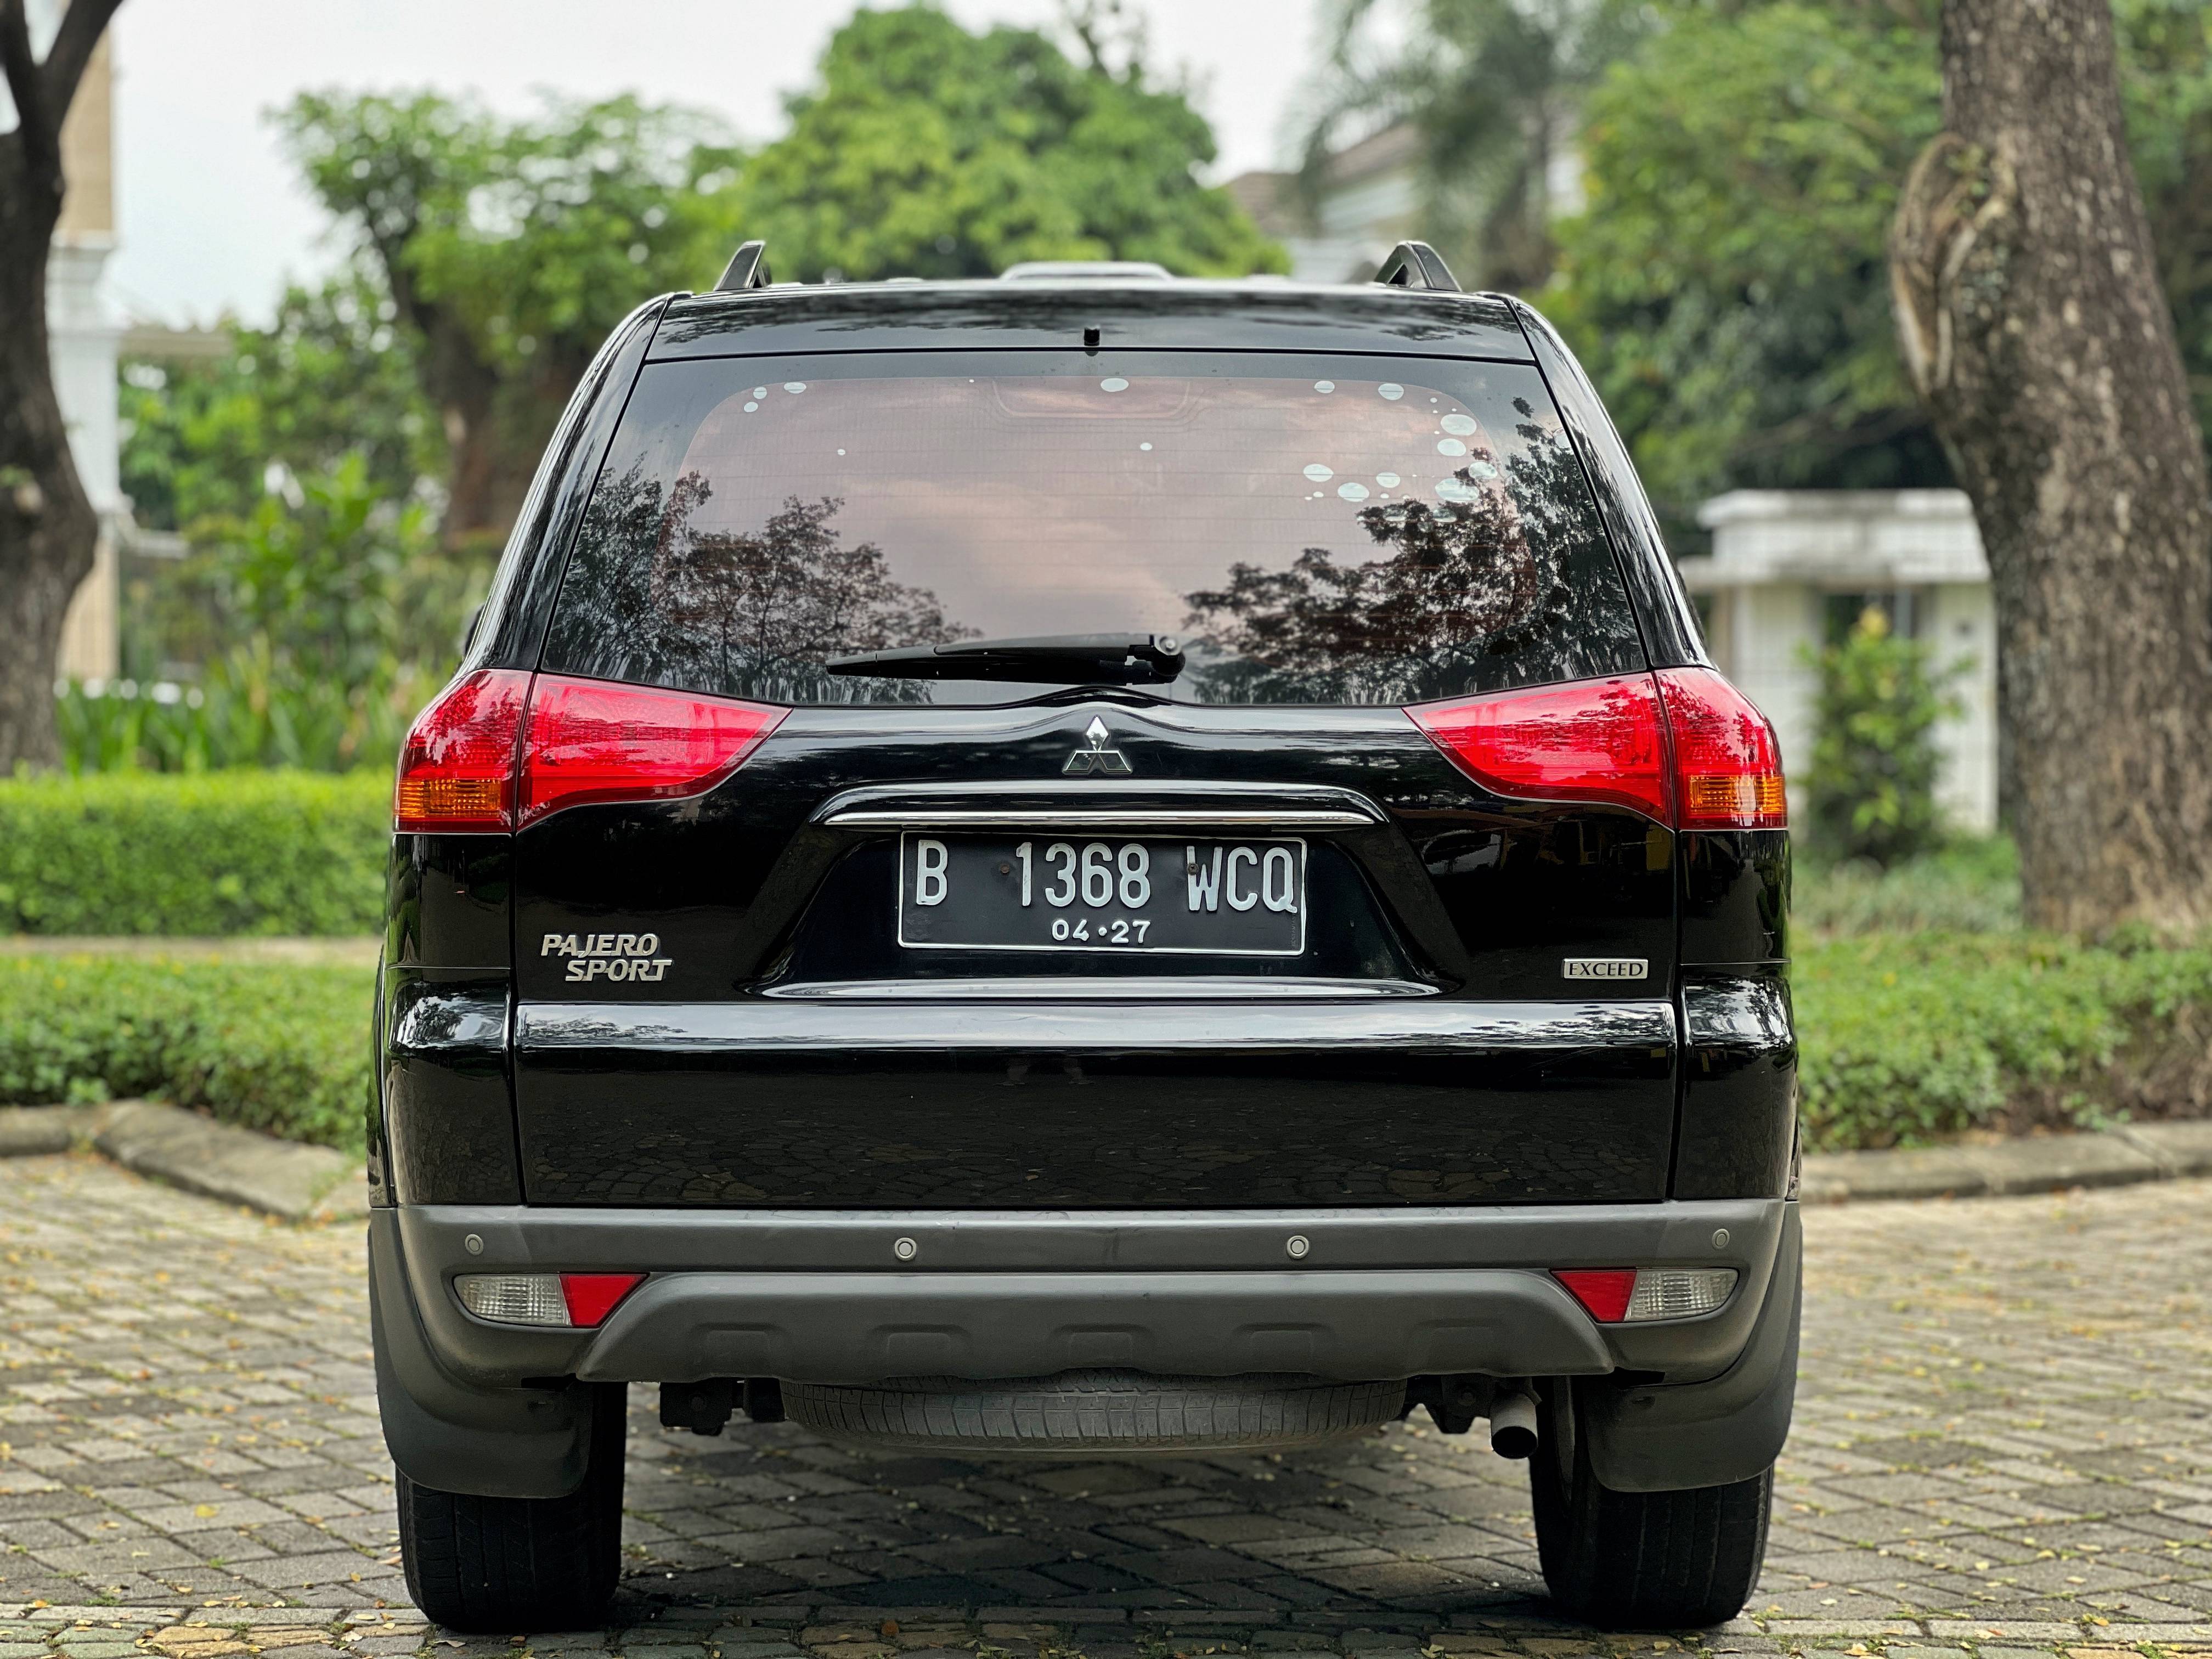 Used 2012 Mitsubishi Pajero 2.5 EXCEED 4X2 A/T JEP 2.5 EXCEED 4X2 A/T JEP for sale